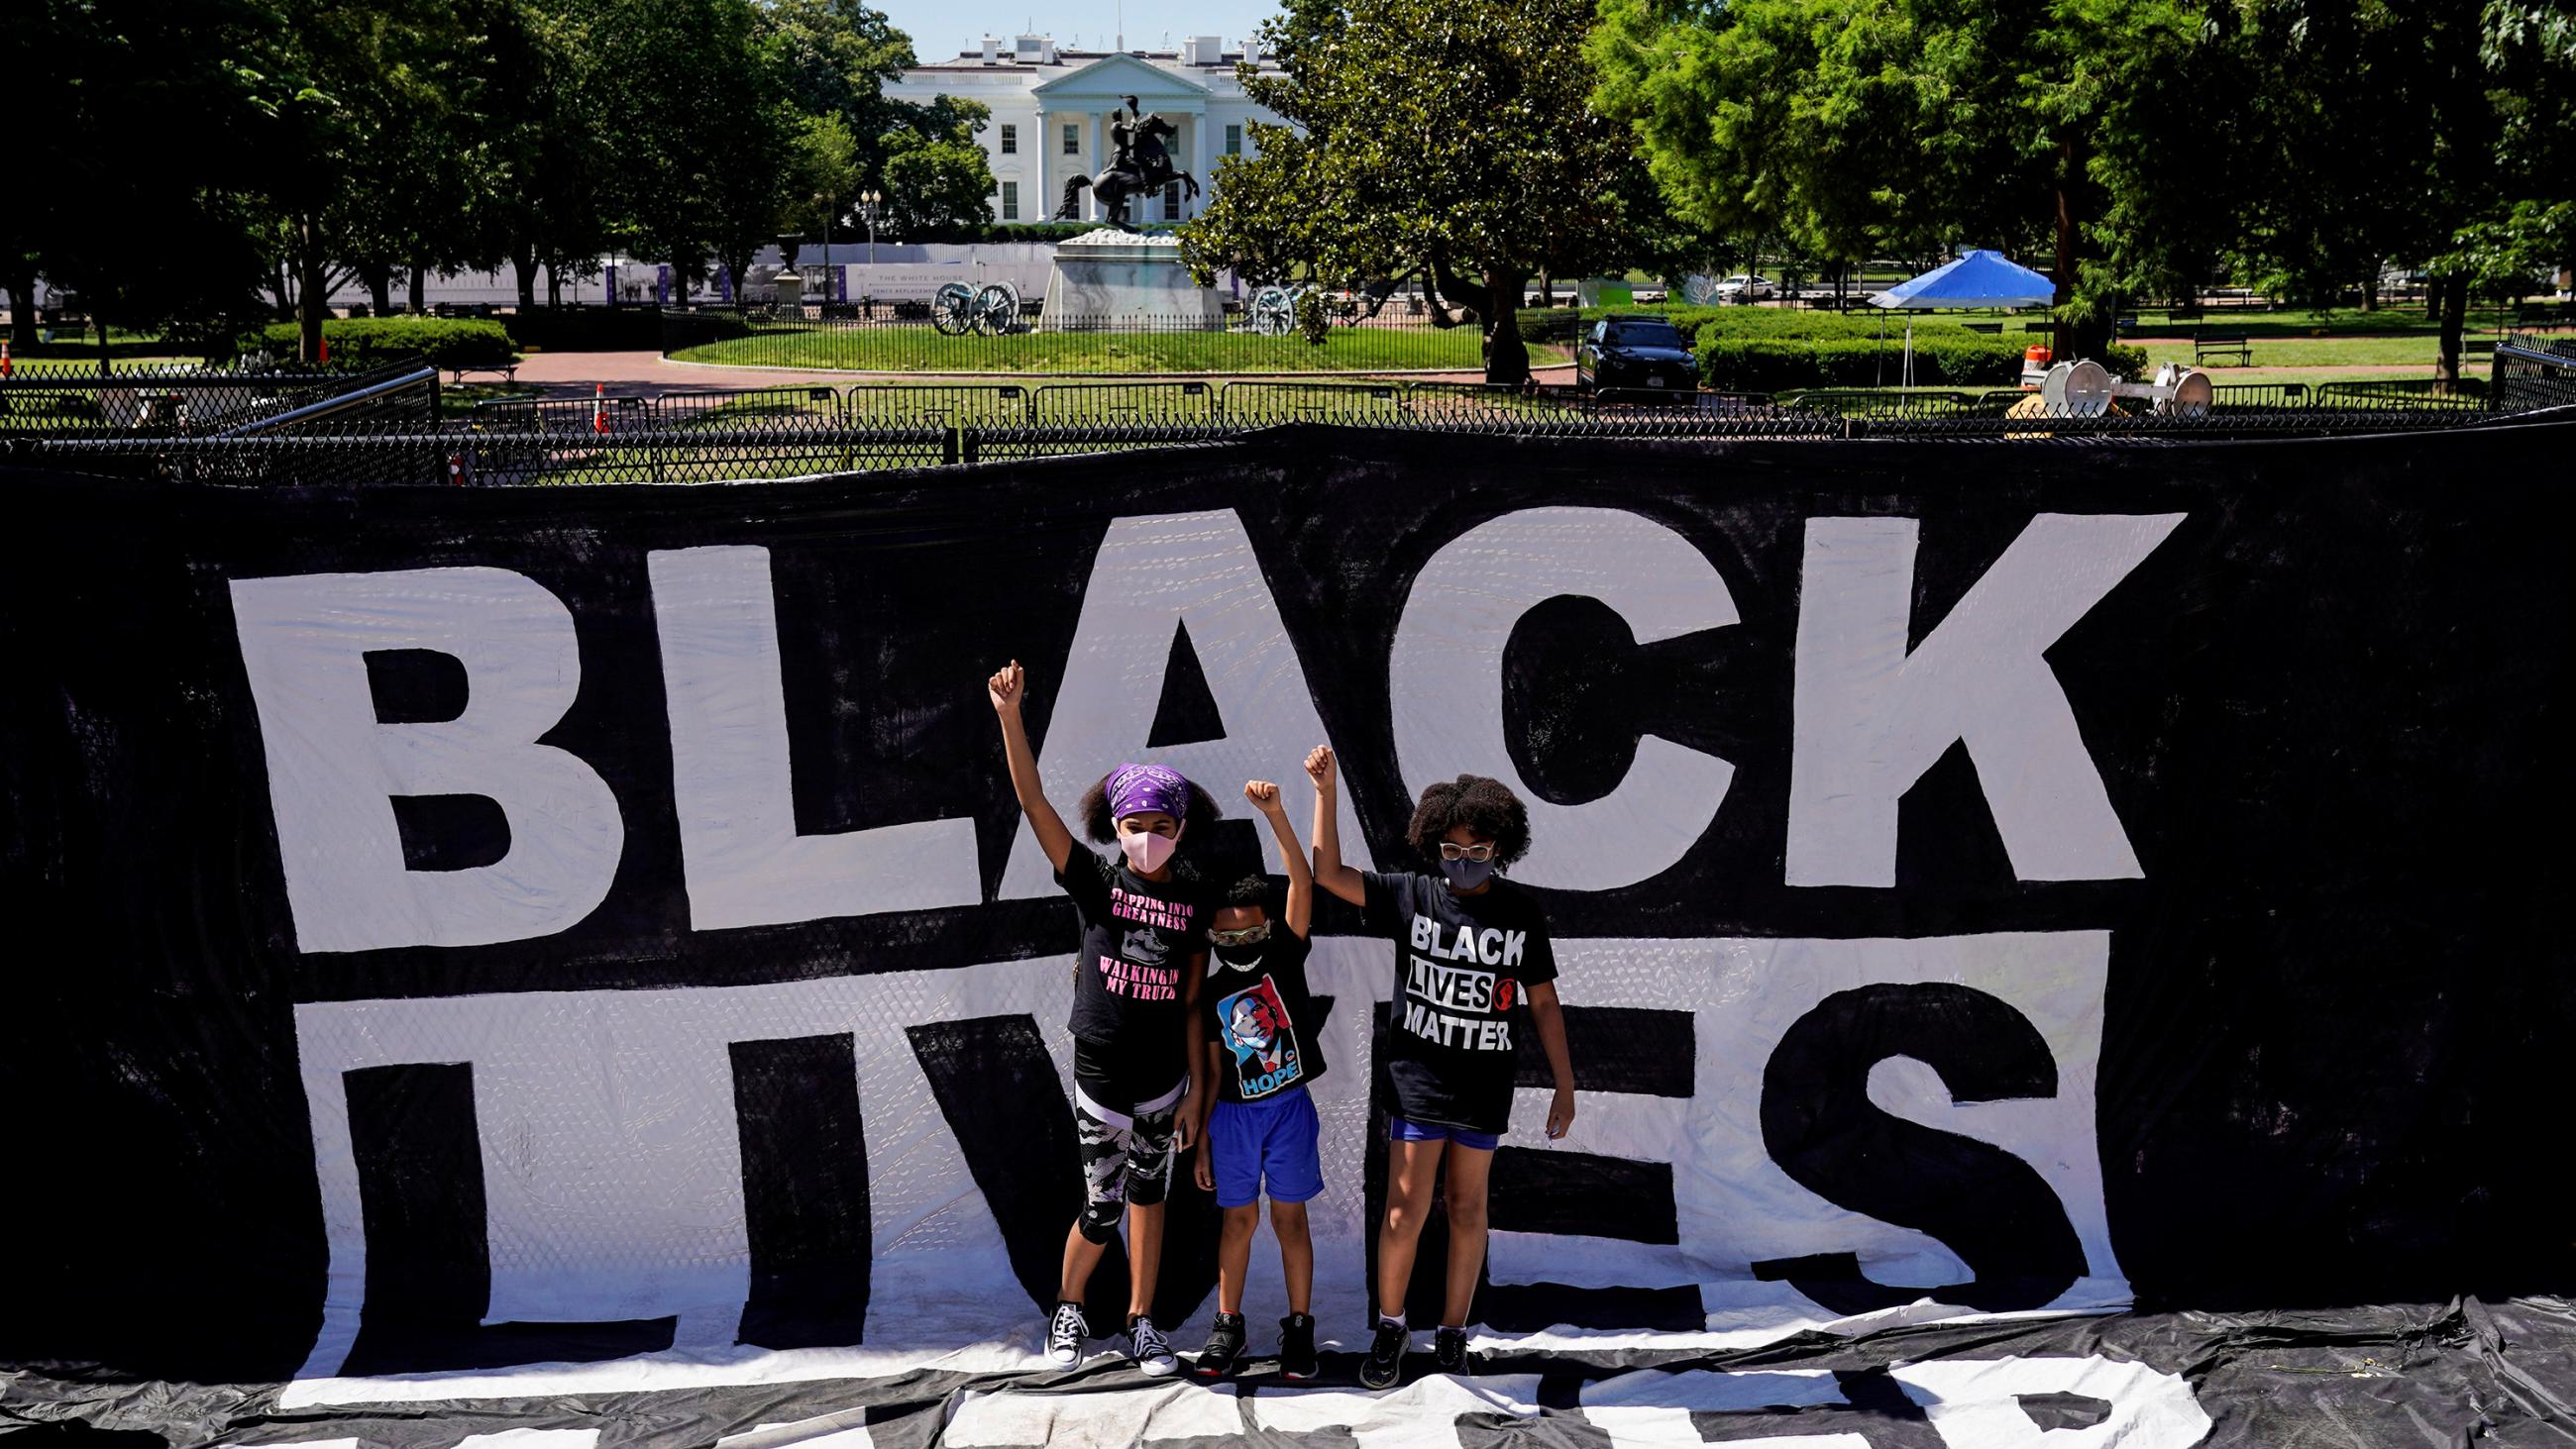 The photo shows a group of small children standing amid black lives matter signs. 